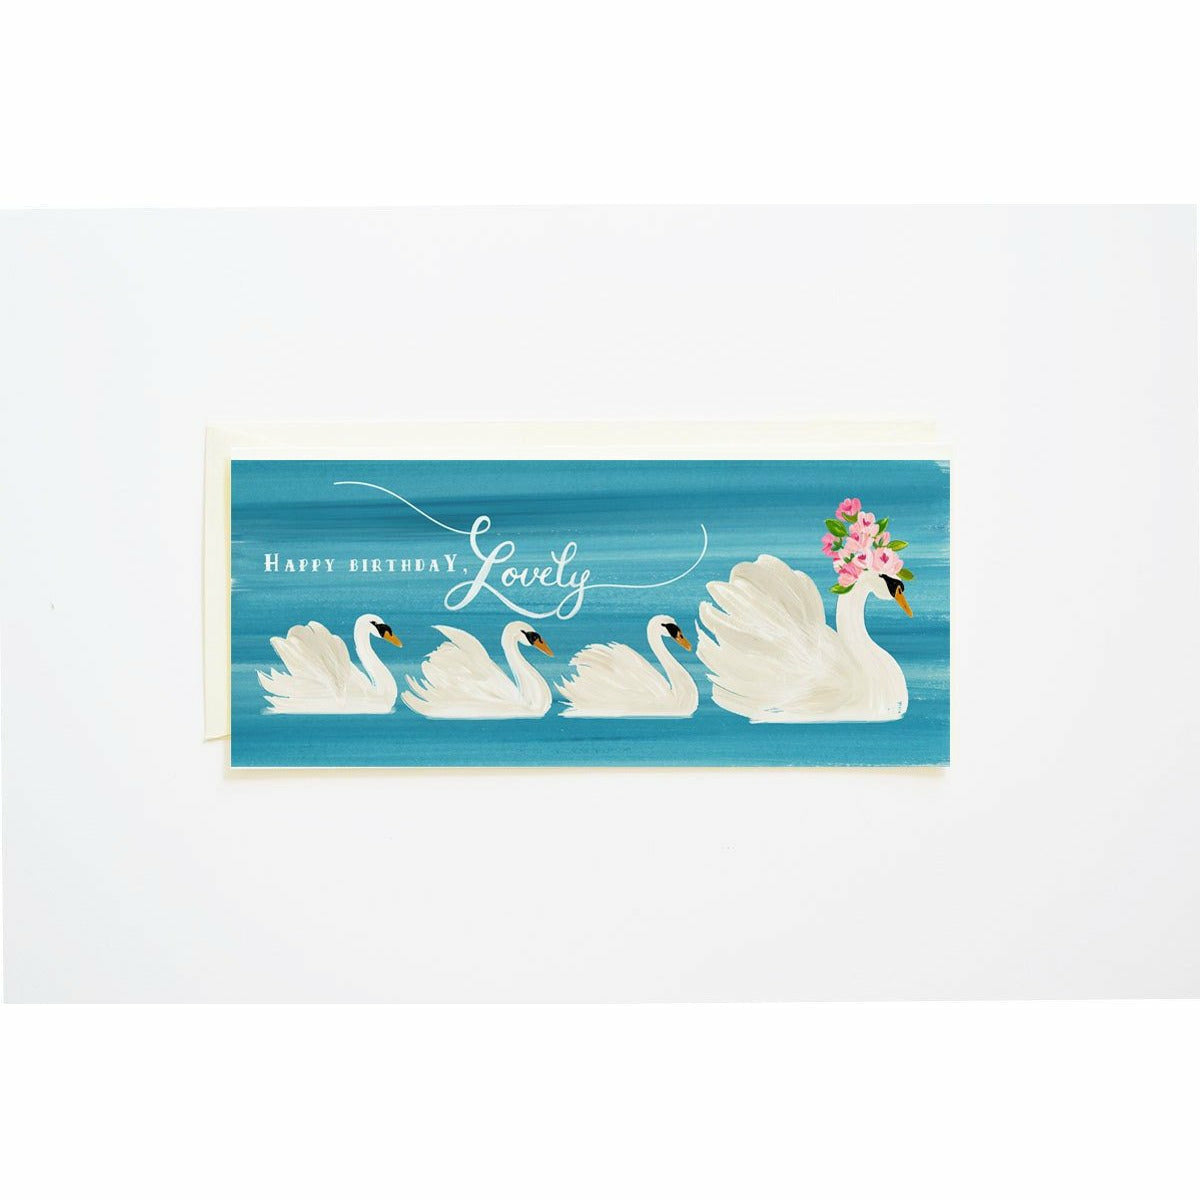 Happy Birthday, Lovely Card with Swans - The First Snow